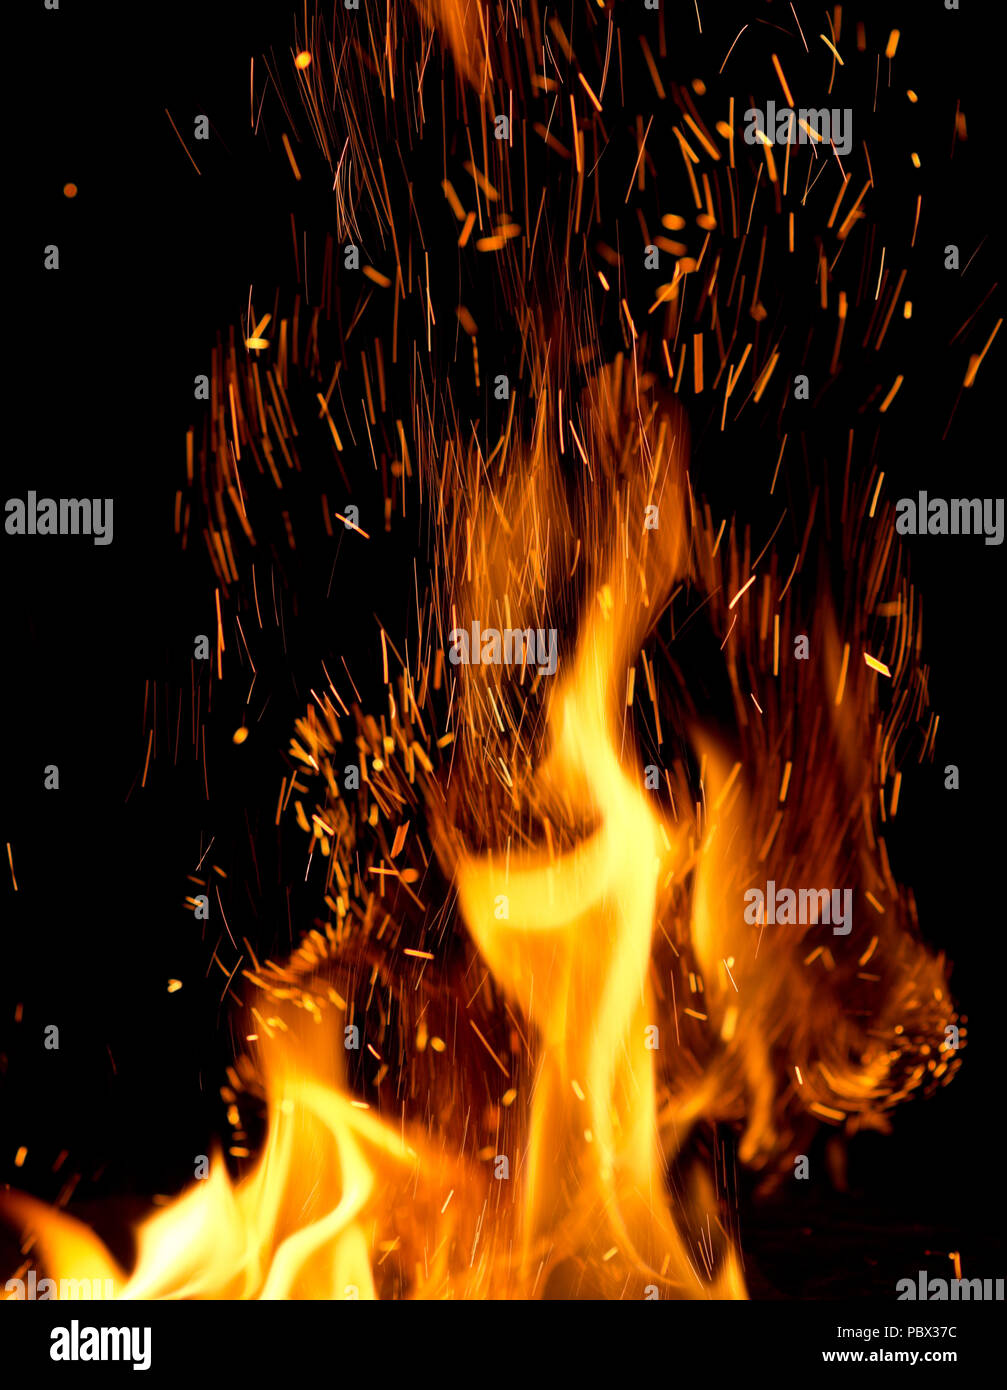 Fire flames with sparks on black background Stock Photo